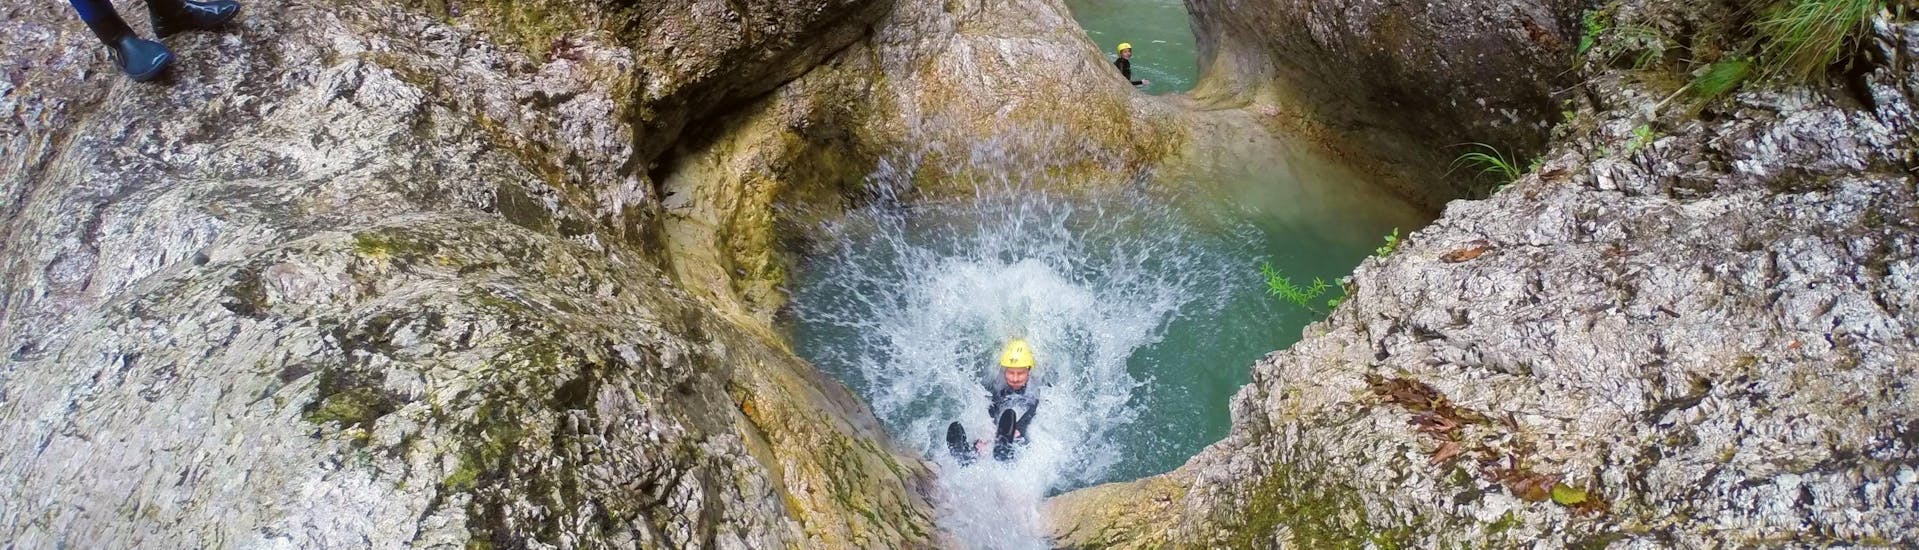 Canyoning in the Kozjak Gorge for Adventurers.